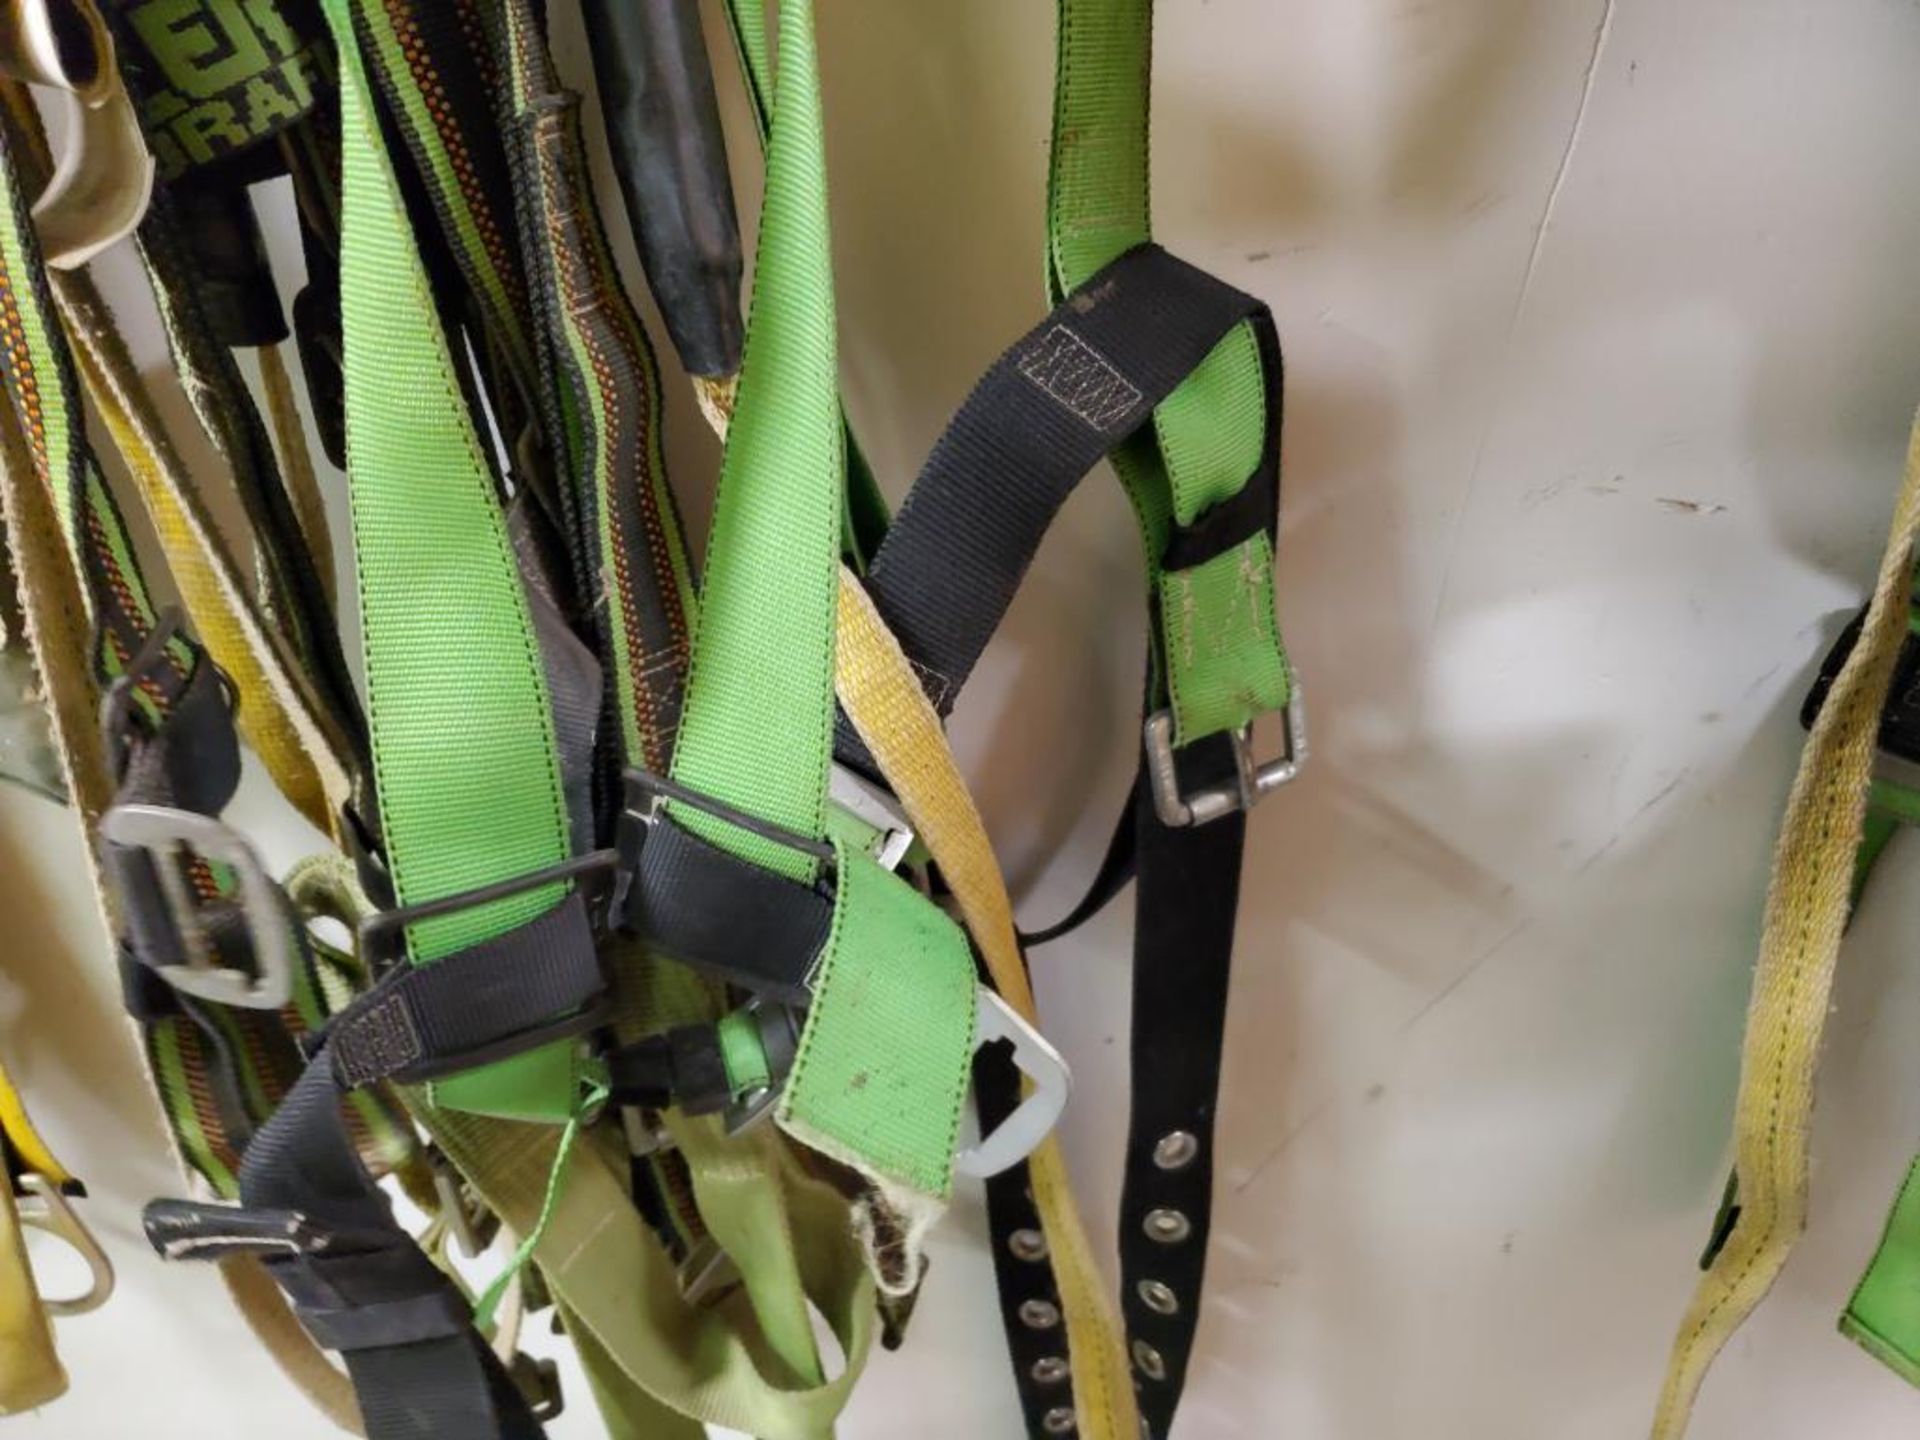 Large assortment of safety harnesses. - Image 8 of 13